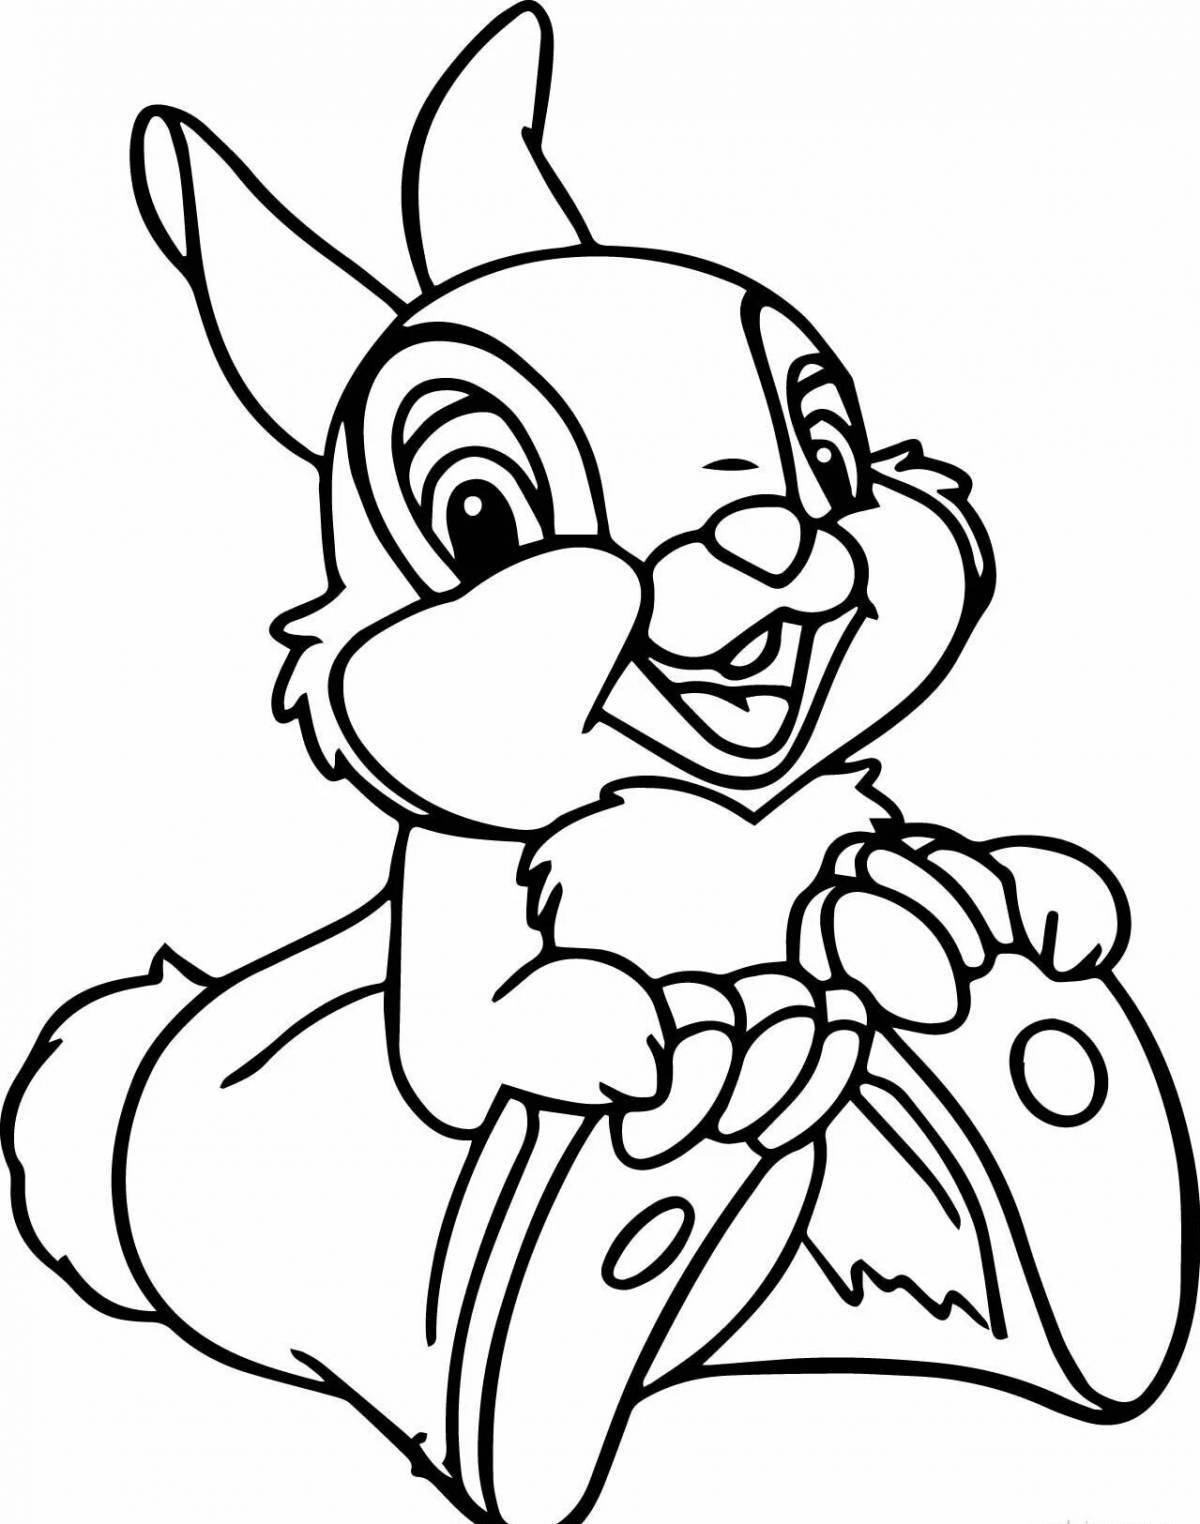 Live Christmas rabbit coloring book